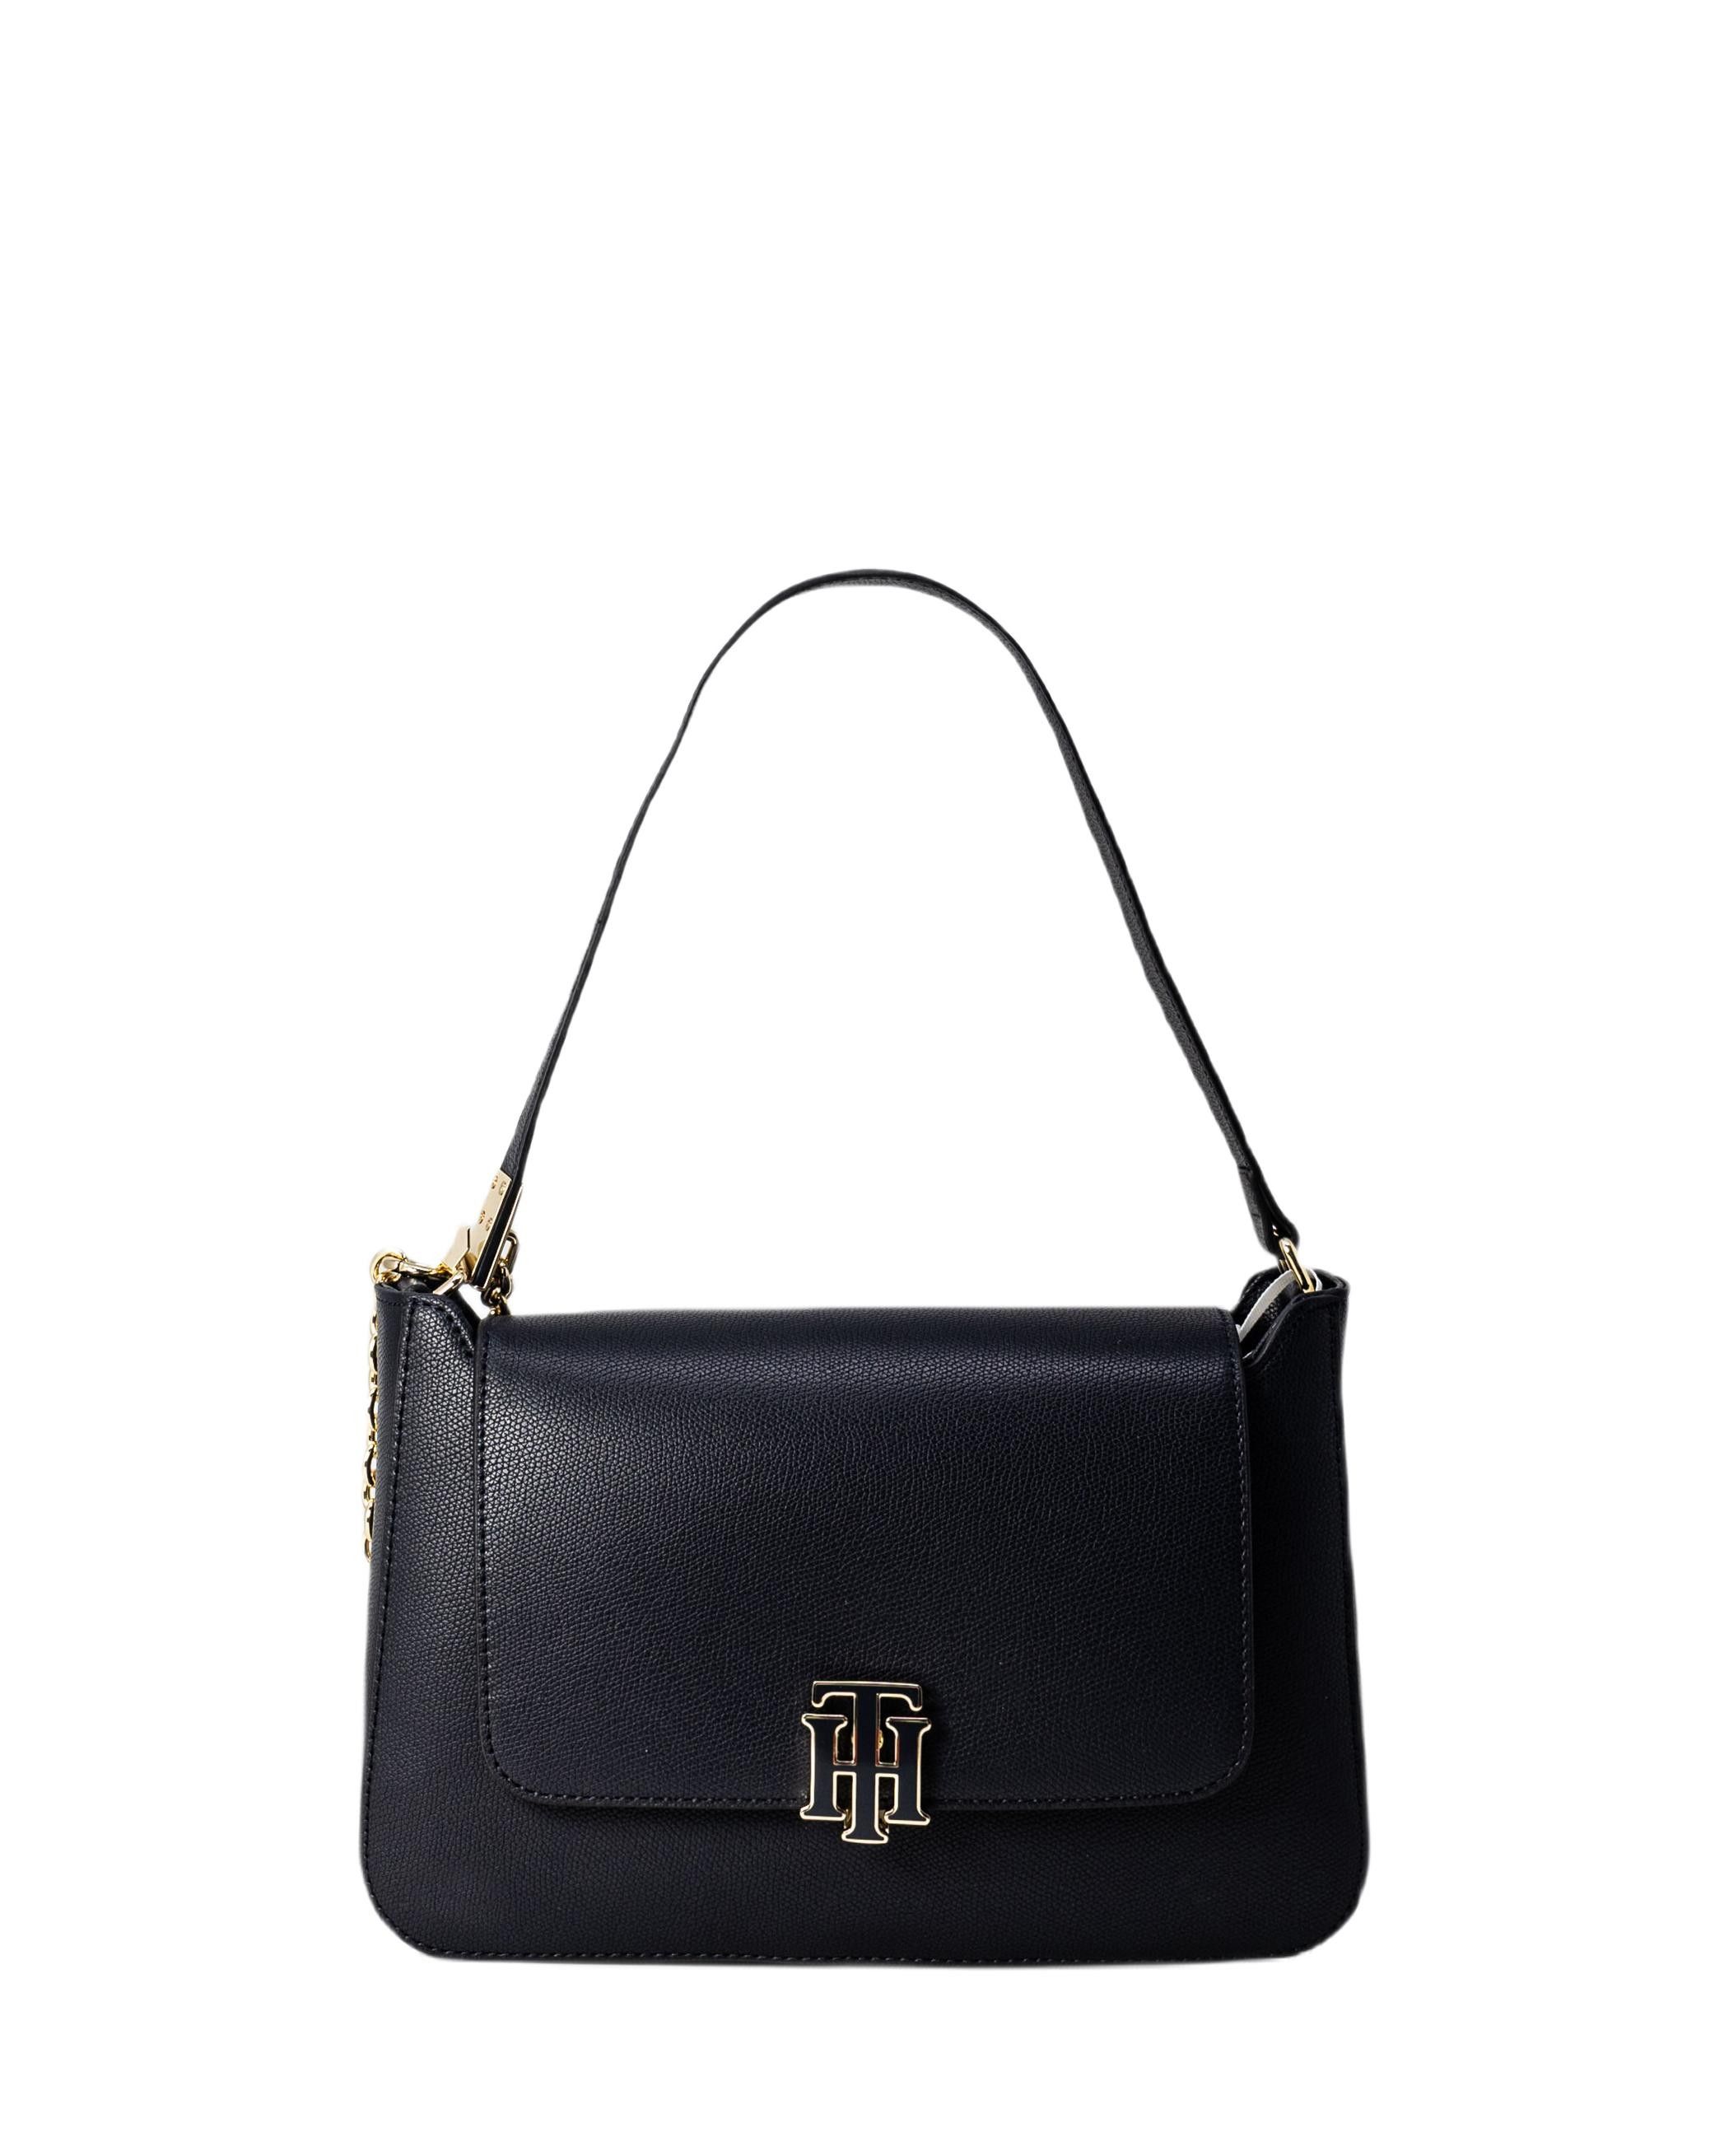 Womens blue Tommy Hilfiger outline shoulder handbag, manufactured with polyurethane. Featuring: th clasp closure, chain handle detail, gold hardware, internal zip section and branded dust bag.